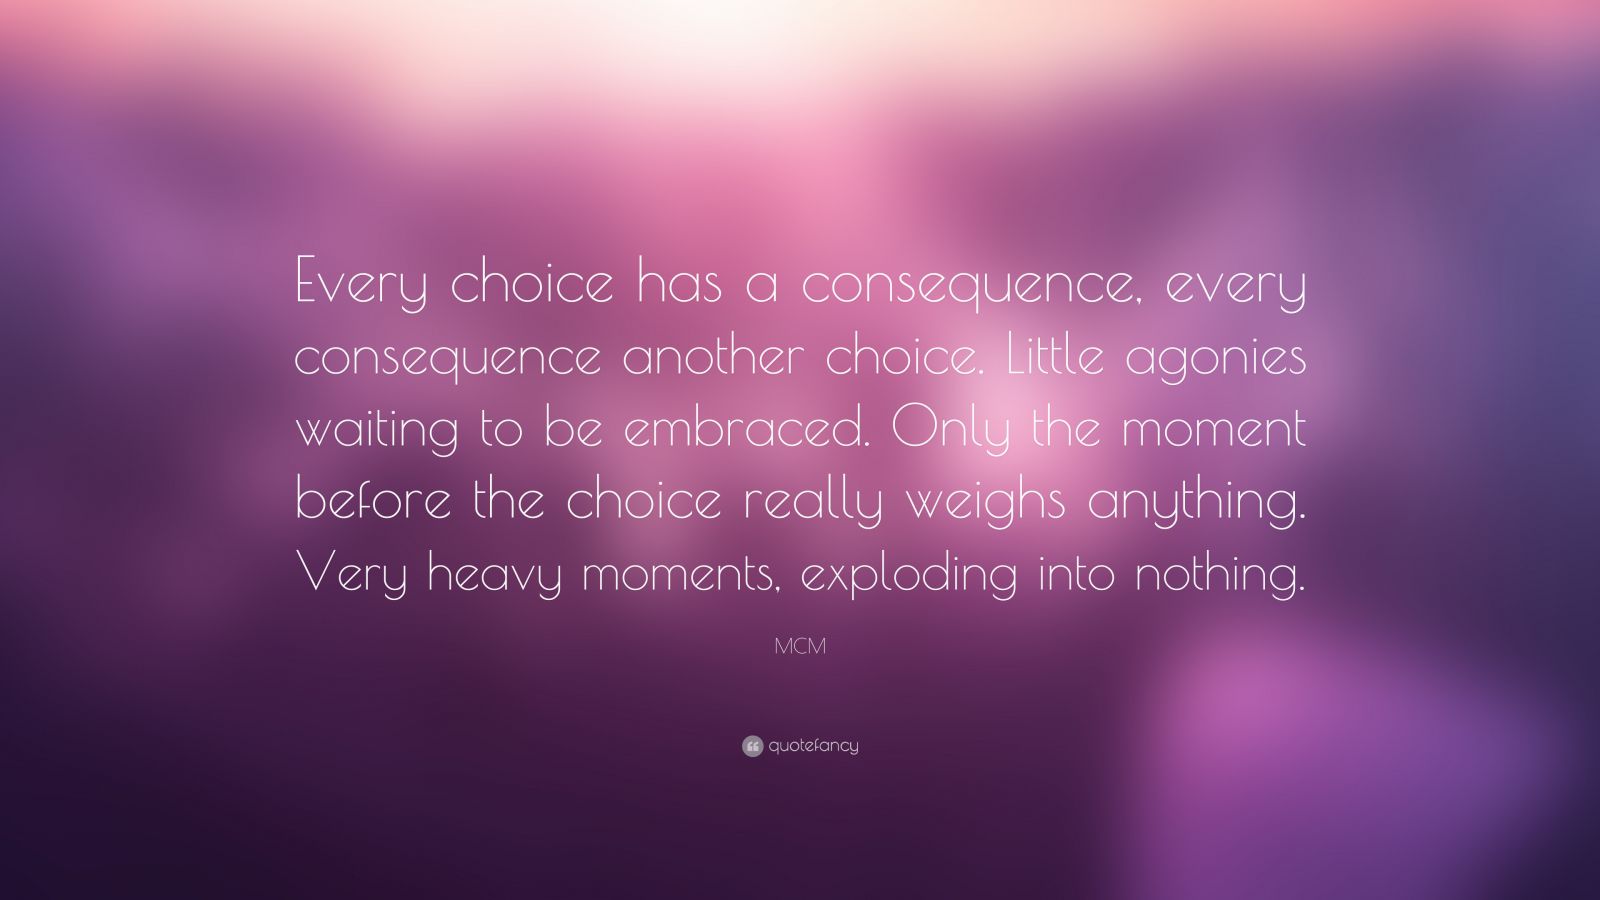 MCM Quote: “Every choice has a consequence ... - Quotefancy